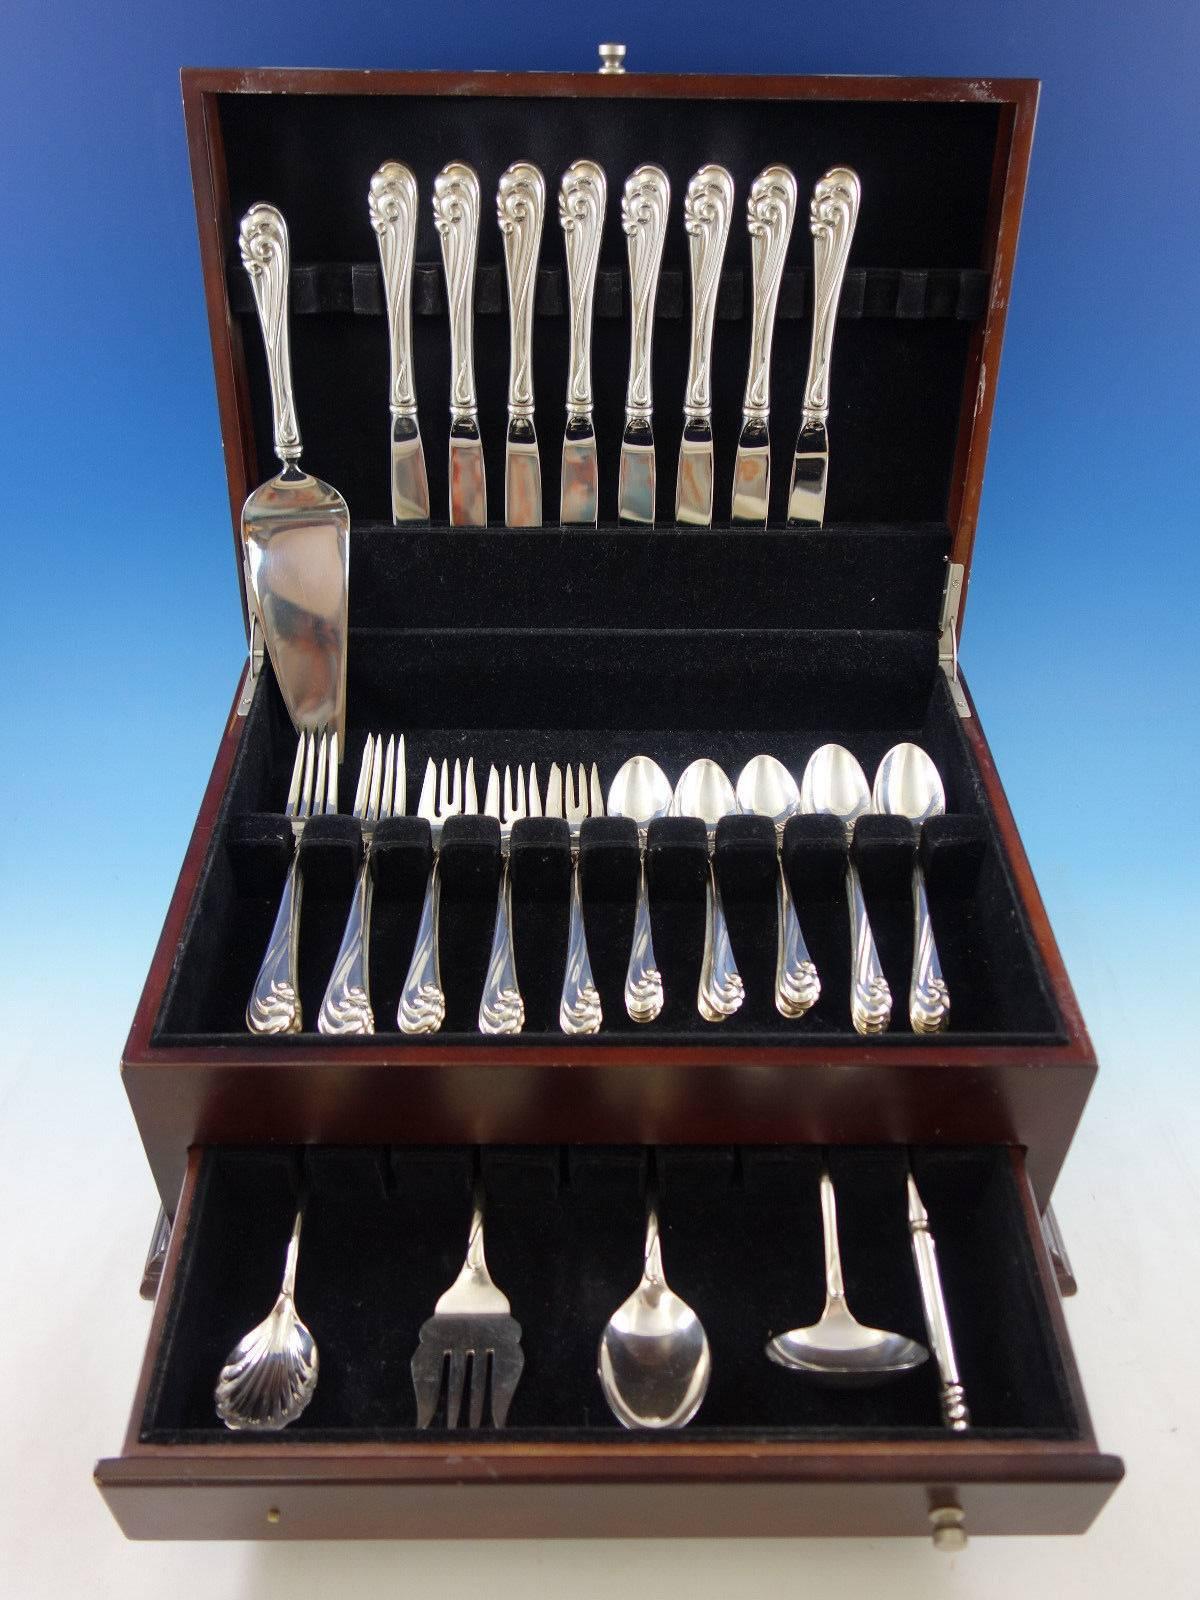 Dancing surf by Kirk sterling silver flatware set, 46 pieces. This set includes: 

eight knives, 9